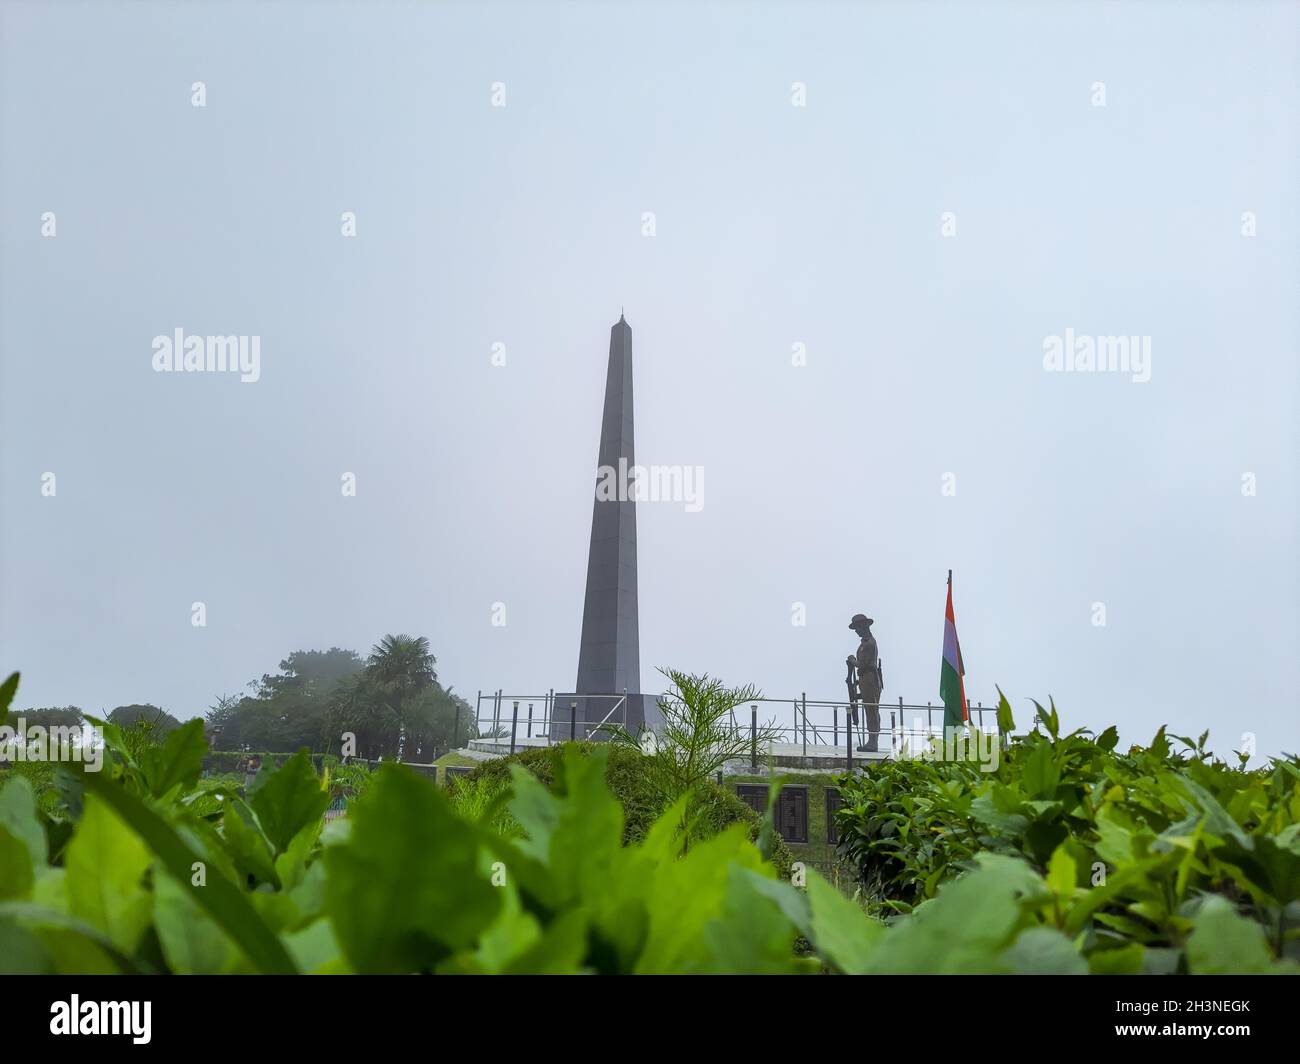 war memorial in the remembrance of brave soldiers at foggy day image is taken at batista loop darjeeling west bengal india. Stock Photo